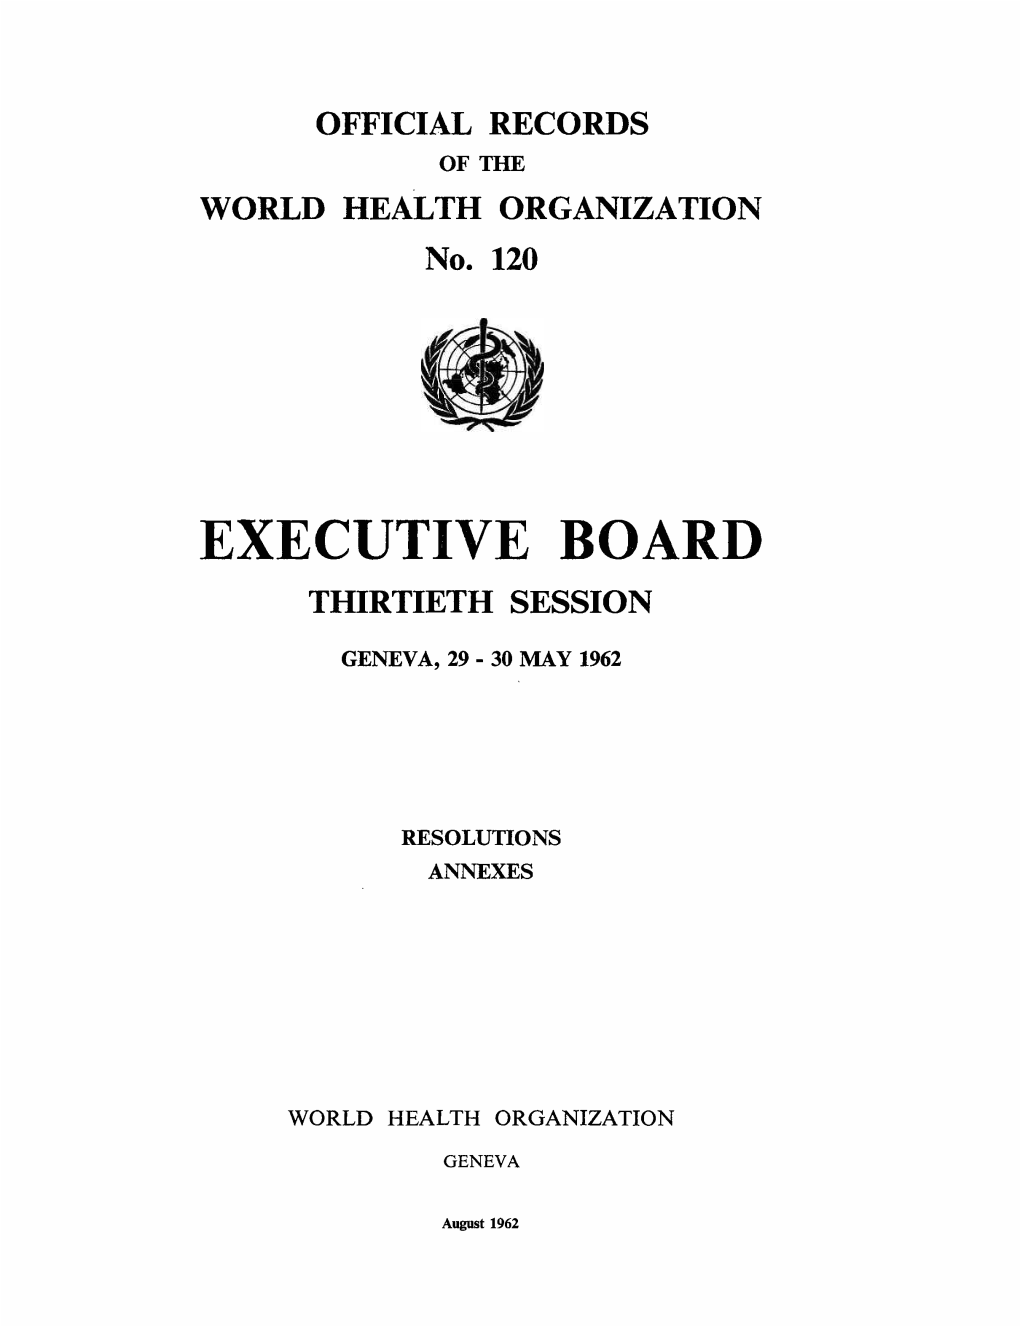 Executive Board Thirtieth Session